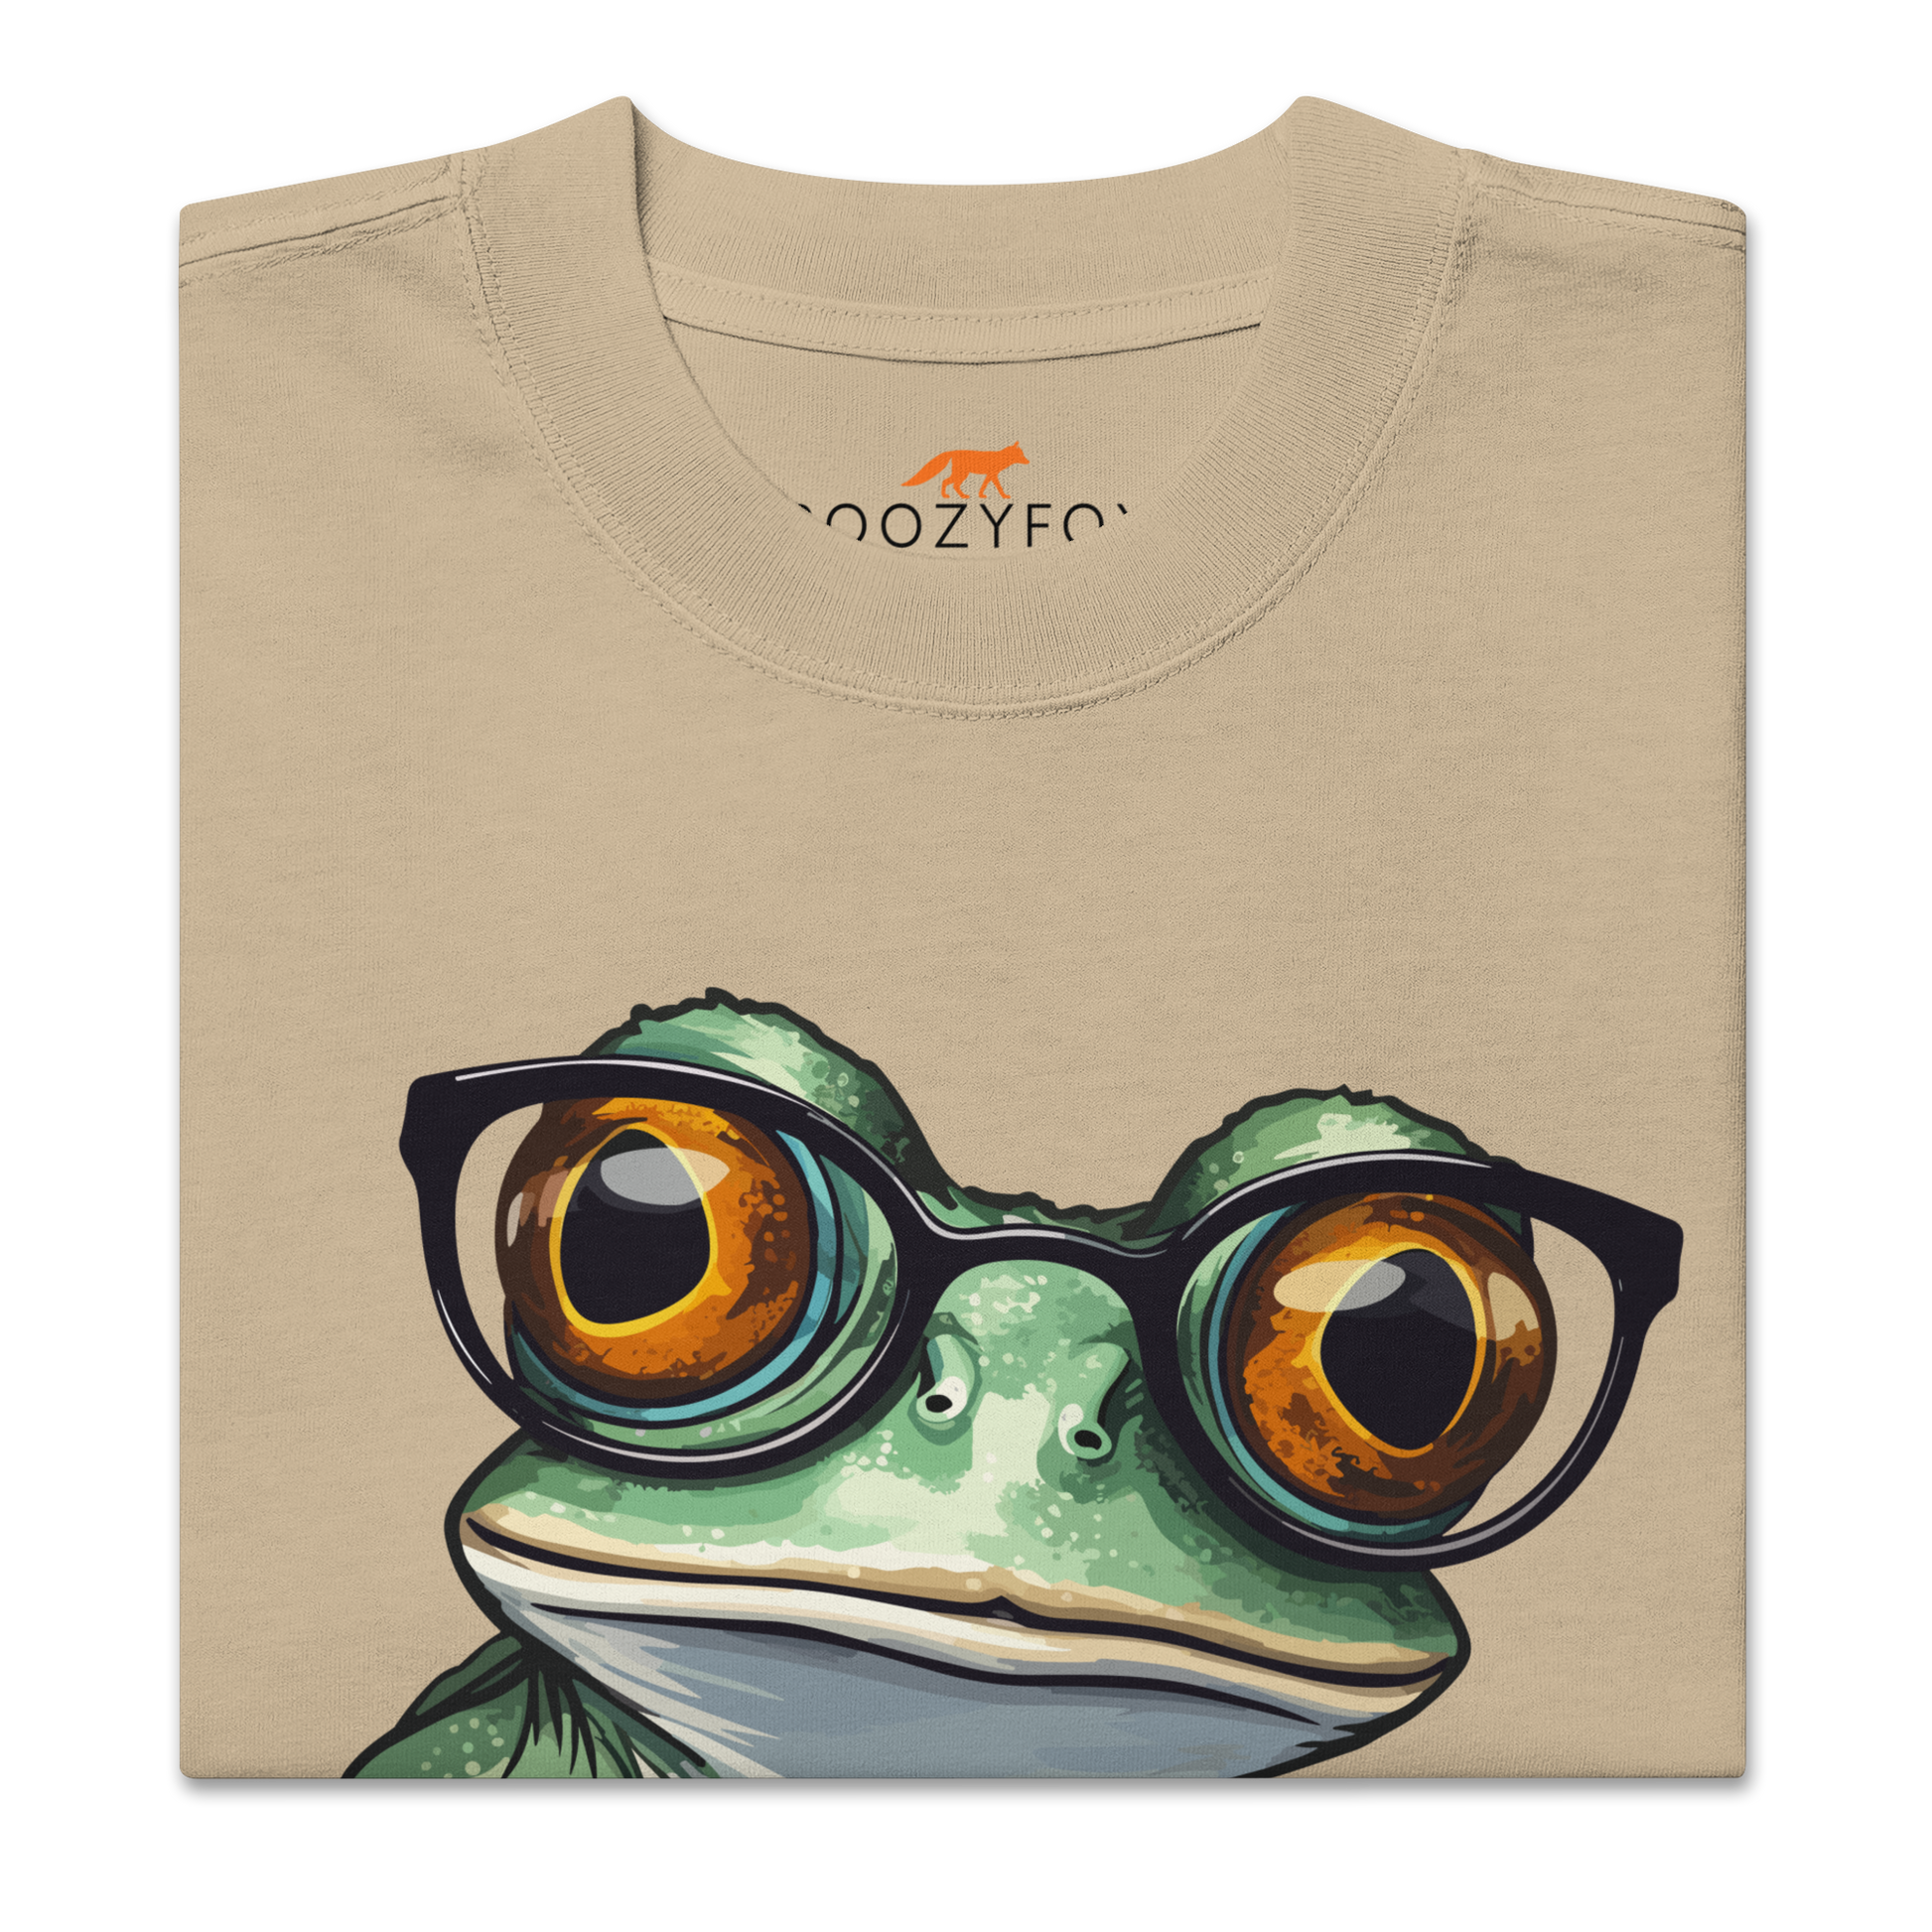 Product details of a Faded Khaki Frog Oversized T-Shirt featuring a ribbitting Don't Worry, Be Hoppy graphic on the chest - Funny Graphic Frog Oversized Tees - Boozy Fox